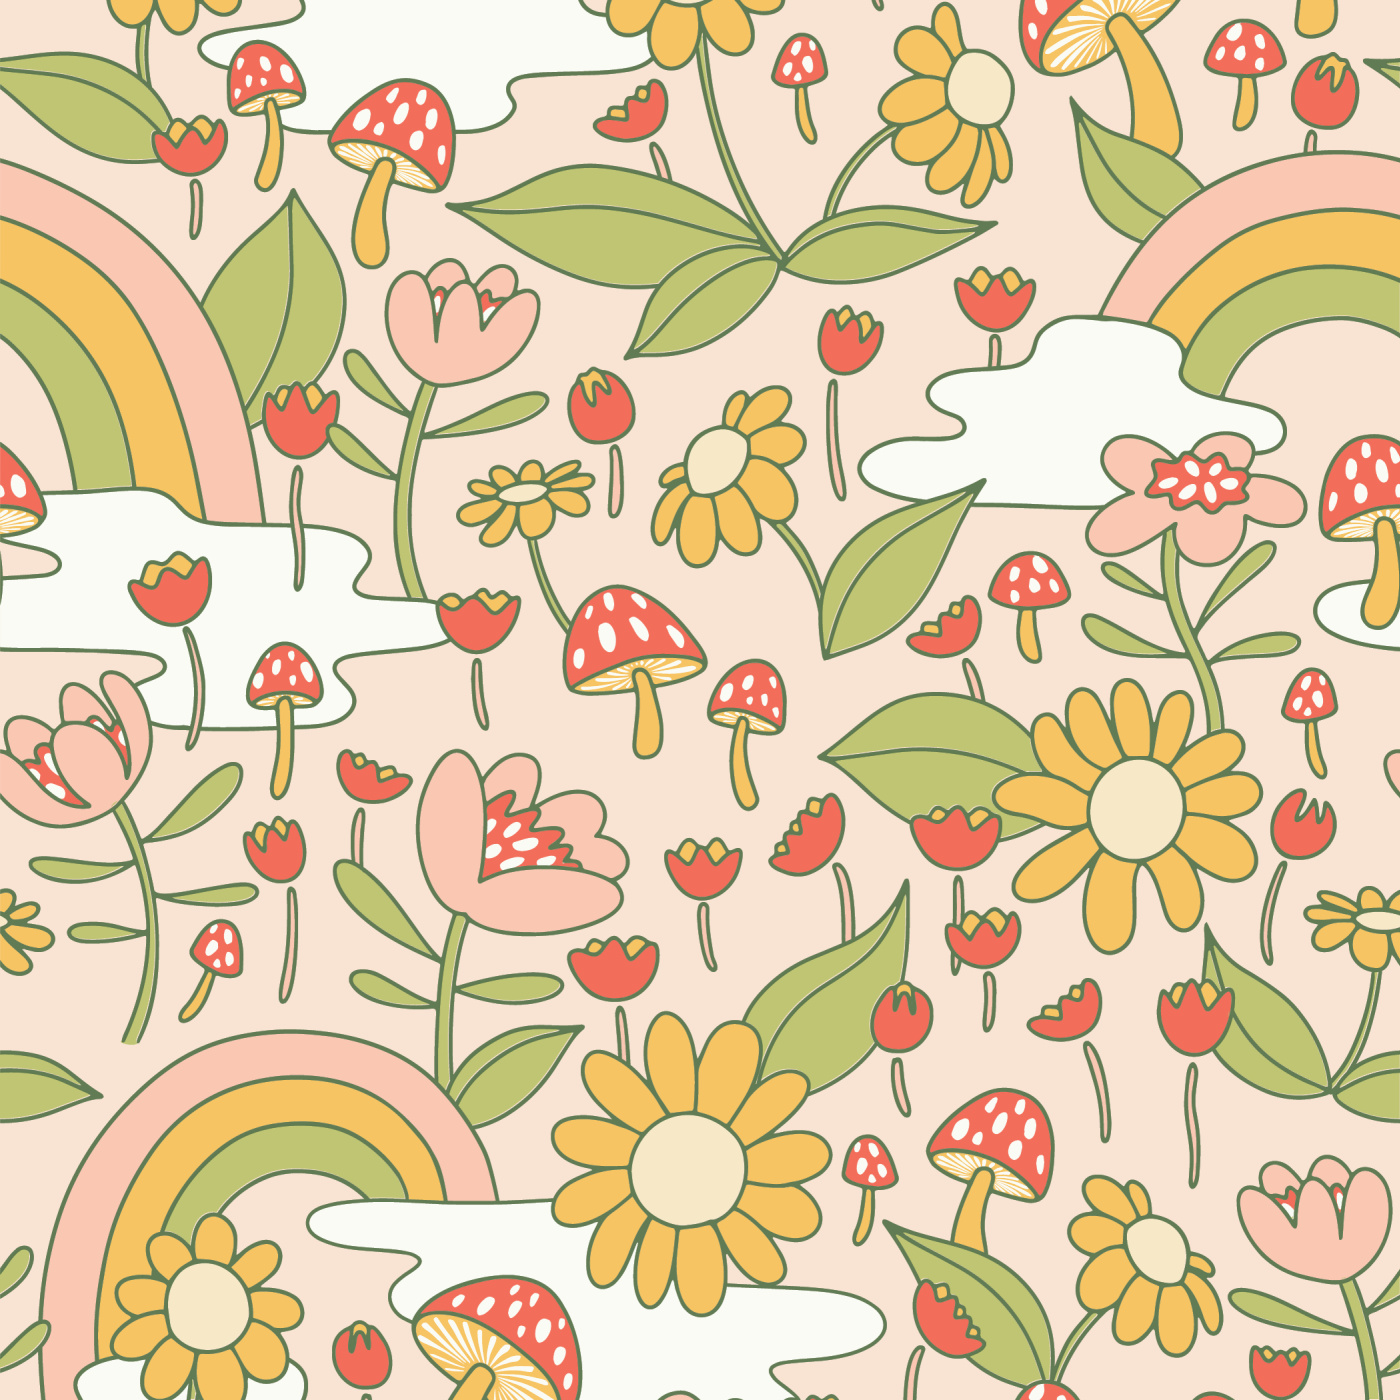 Groovy Wallpaper Vector Images over 6500